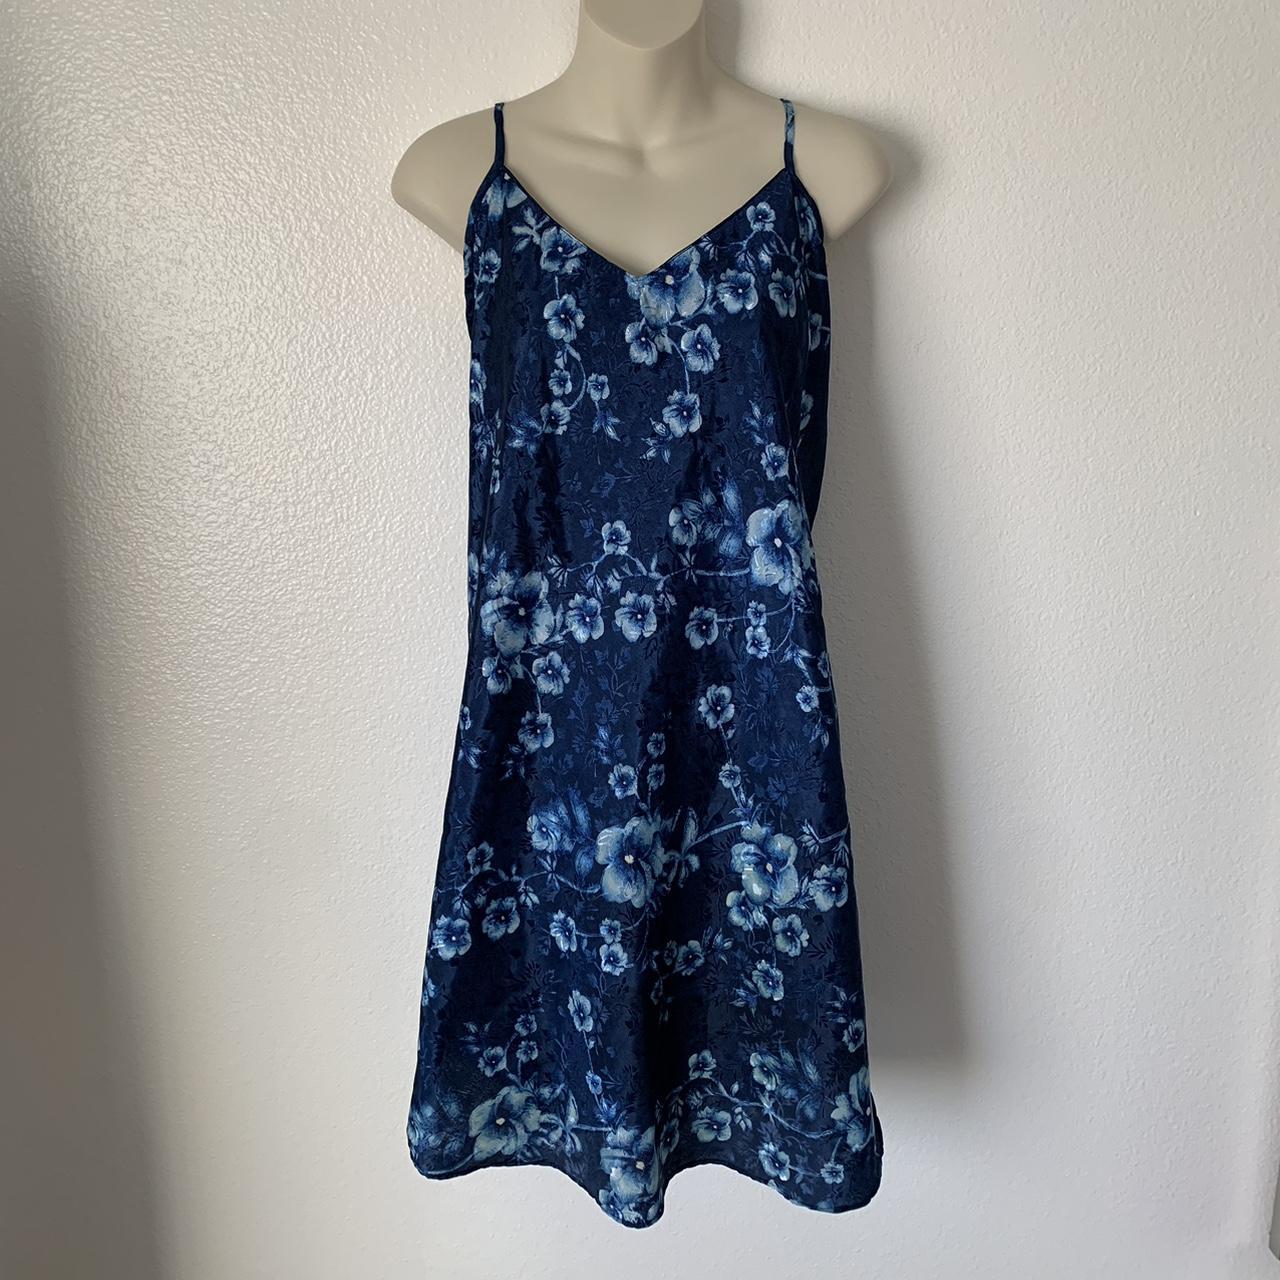 Vintage blue floral slip dress in a size 2X! There... - Depop